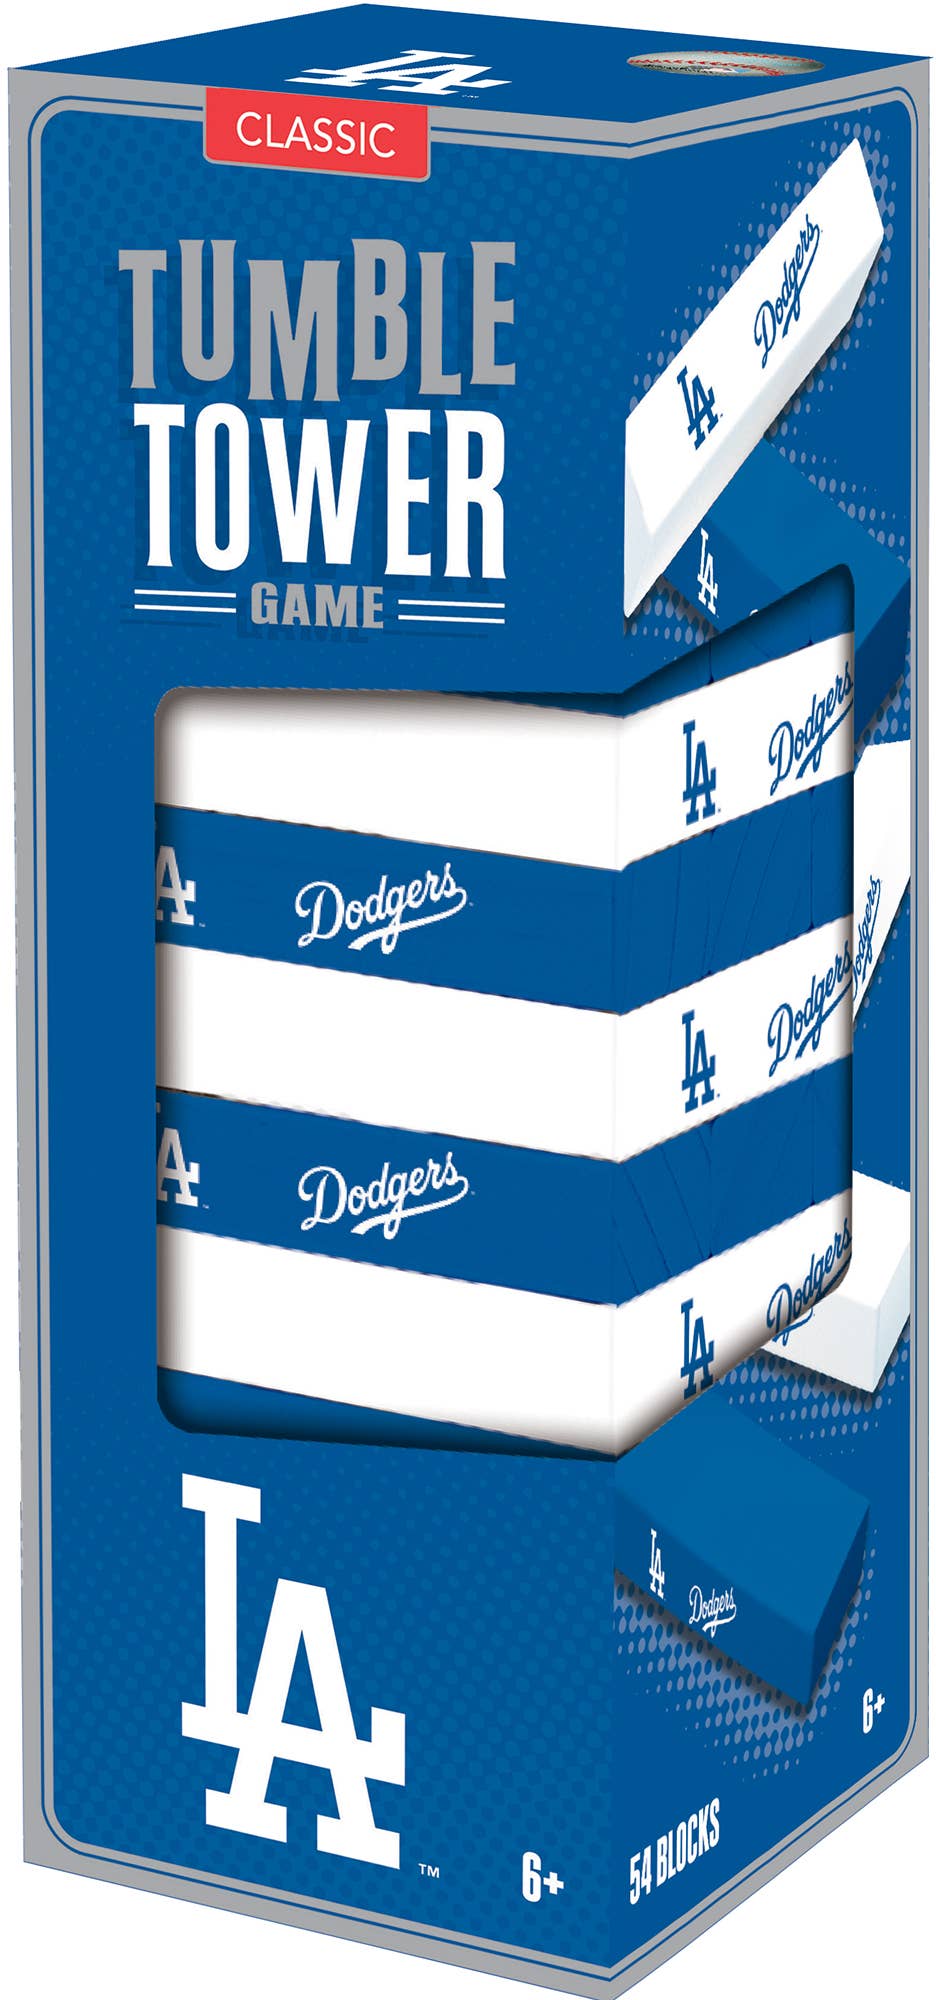 Los Angeles Dodgers Tumble Tower